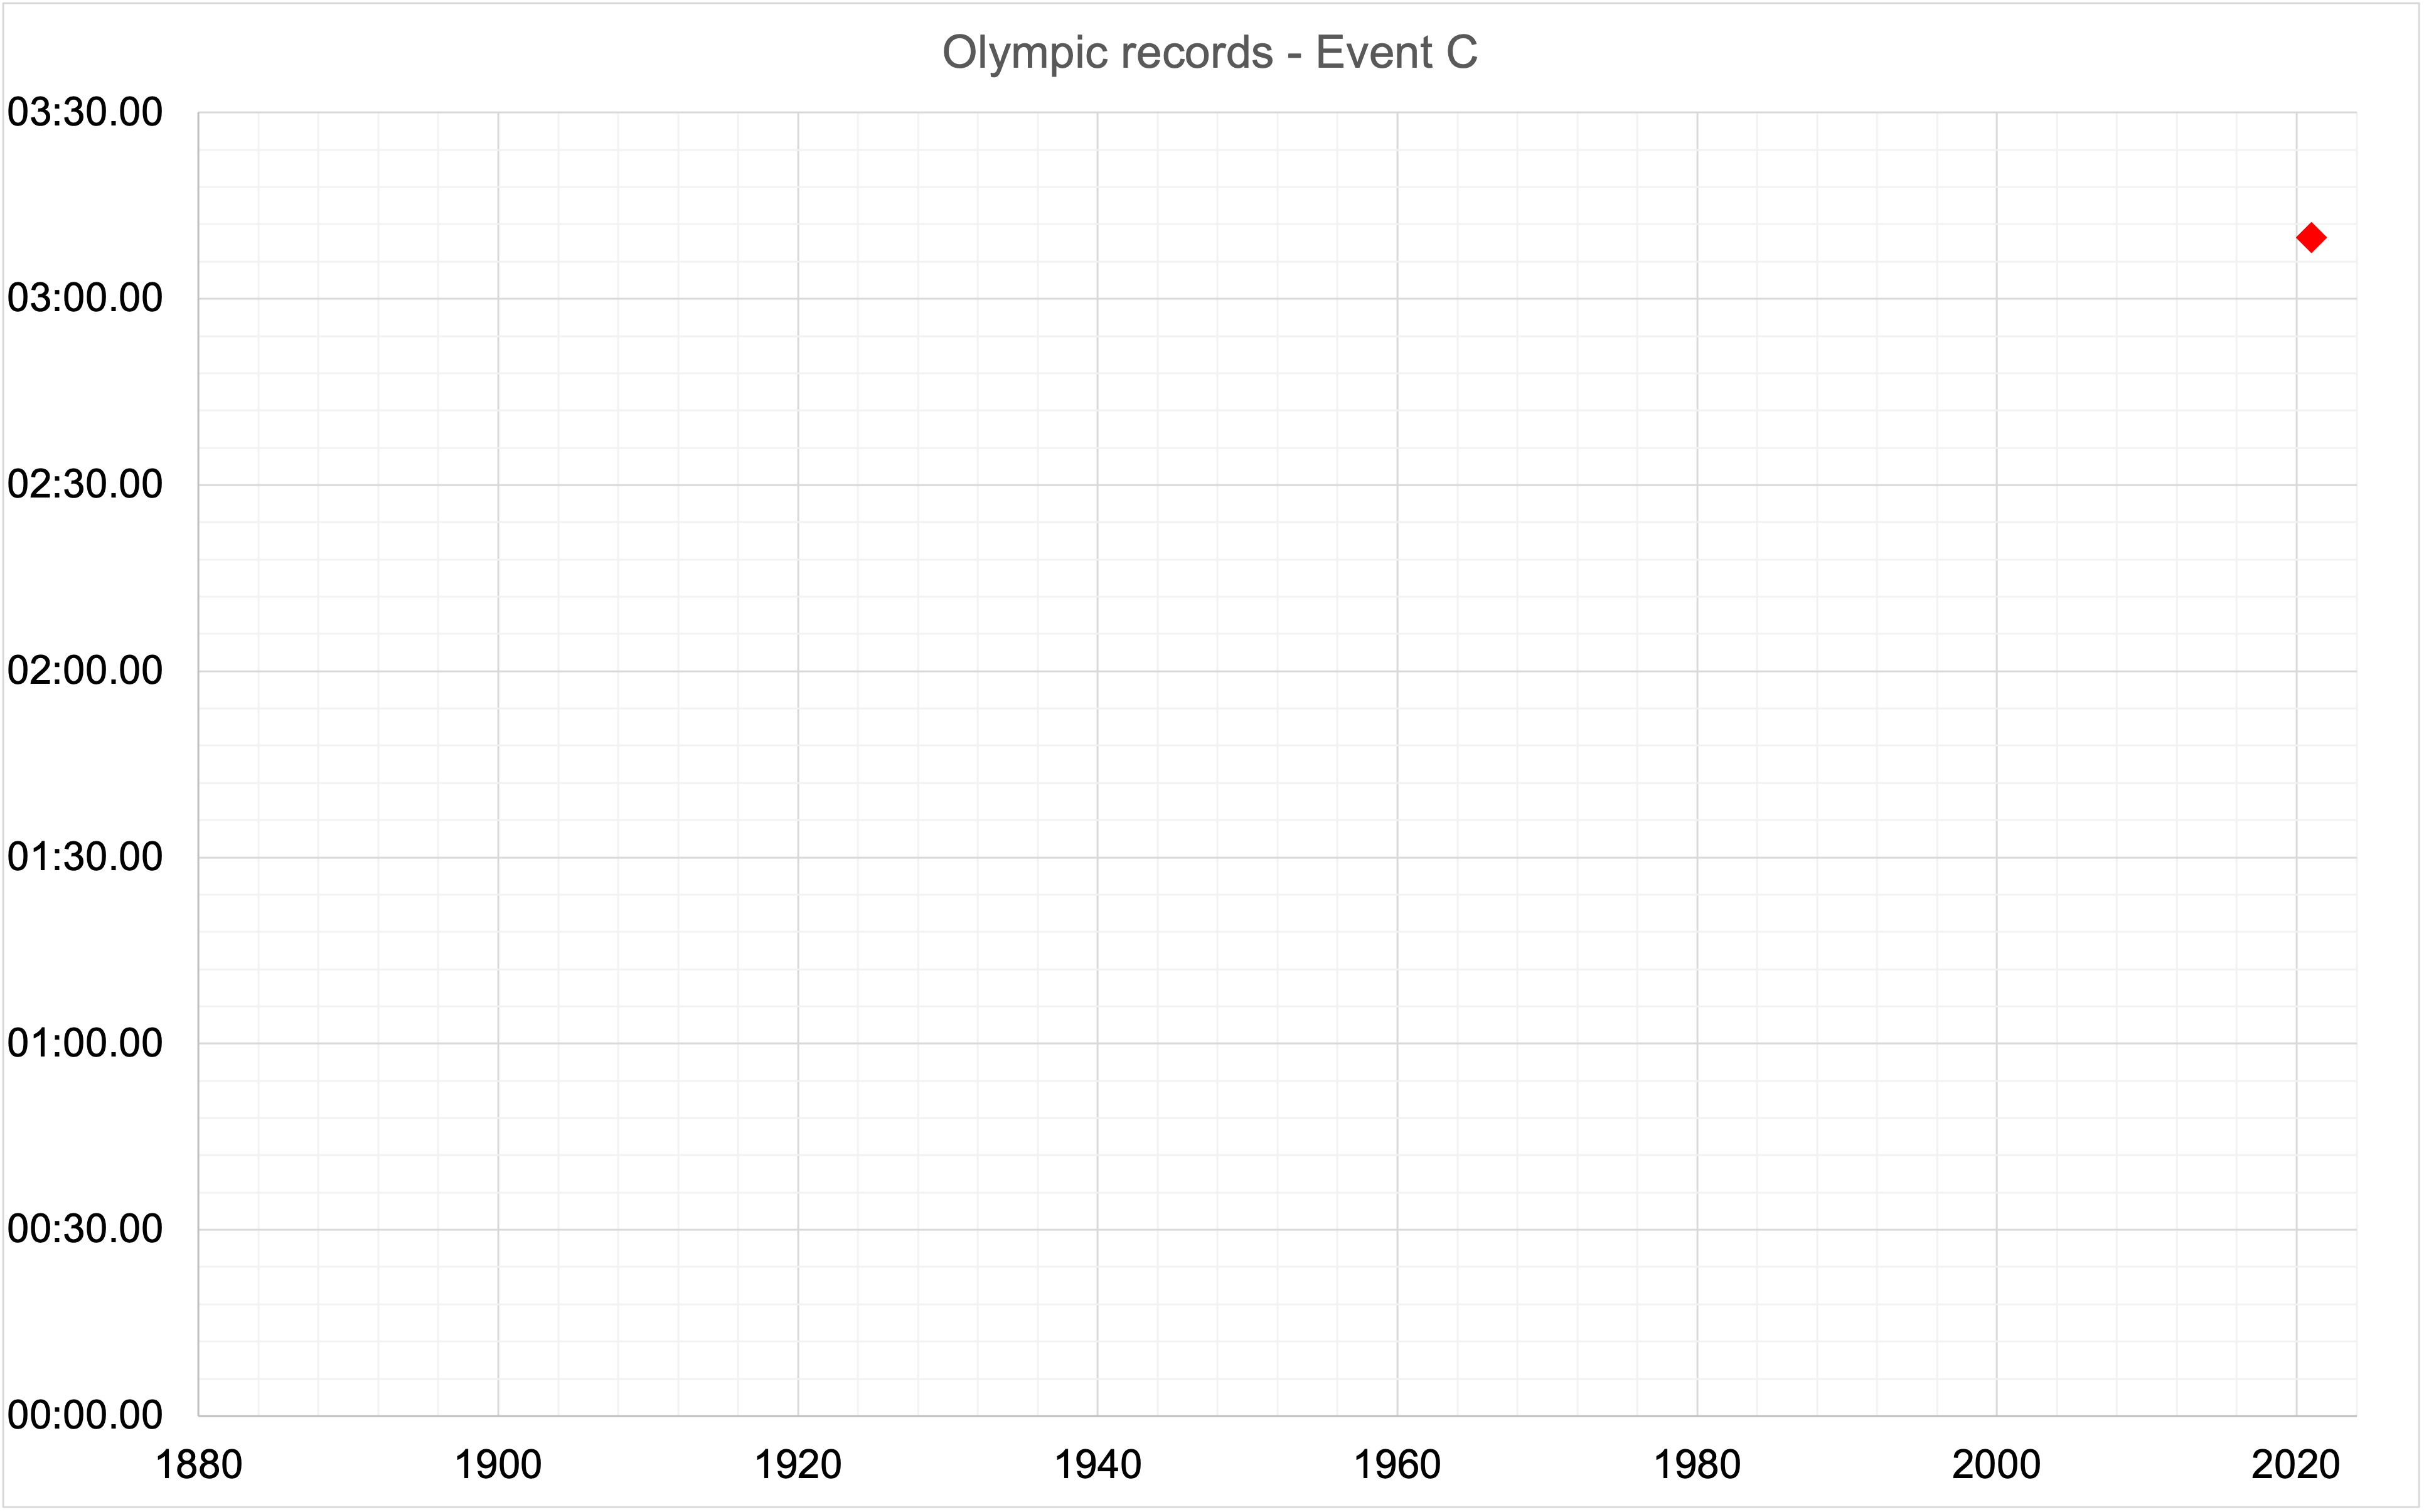 Graph showing Olympic records for Event C